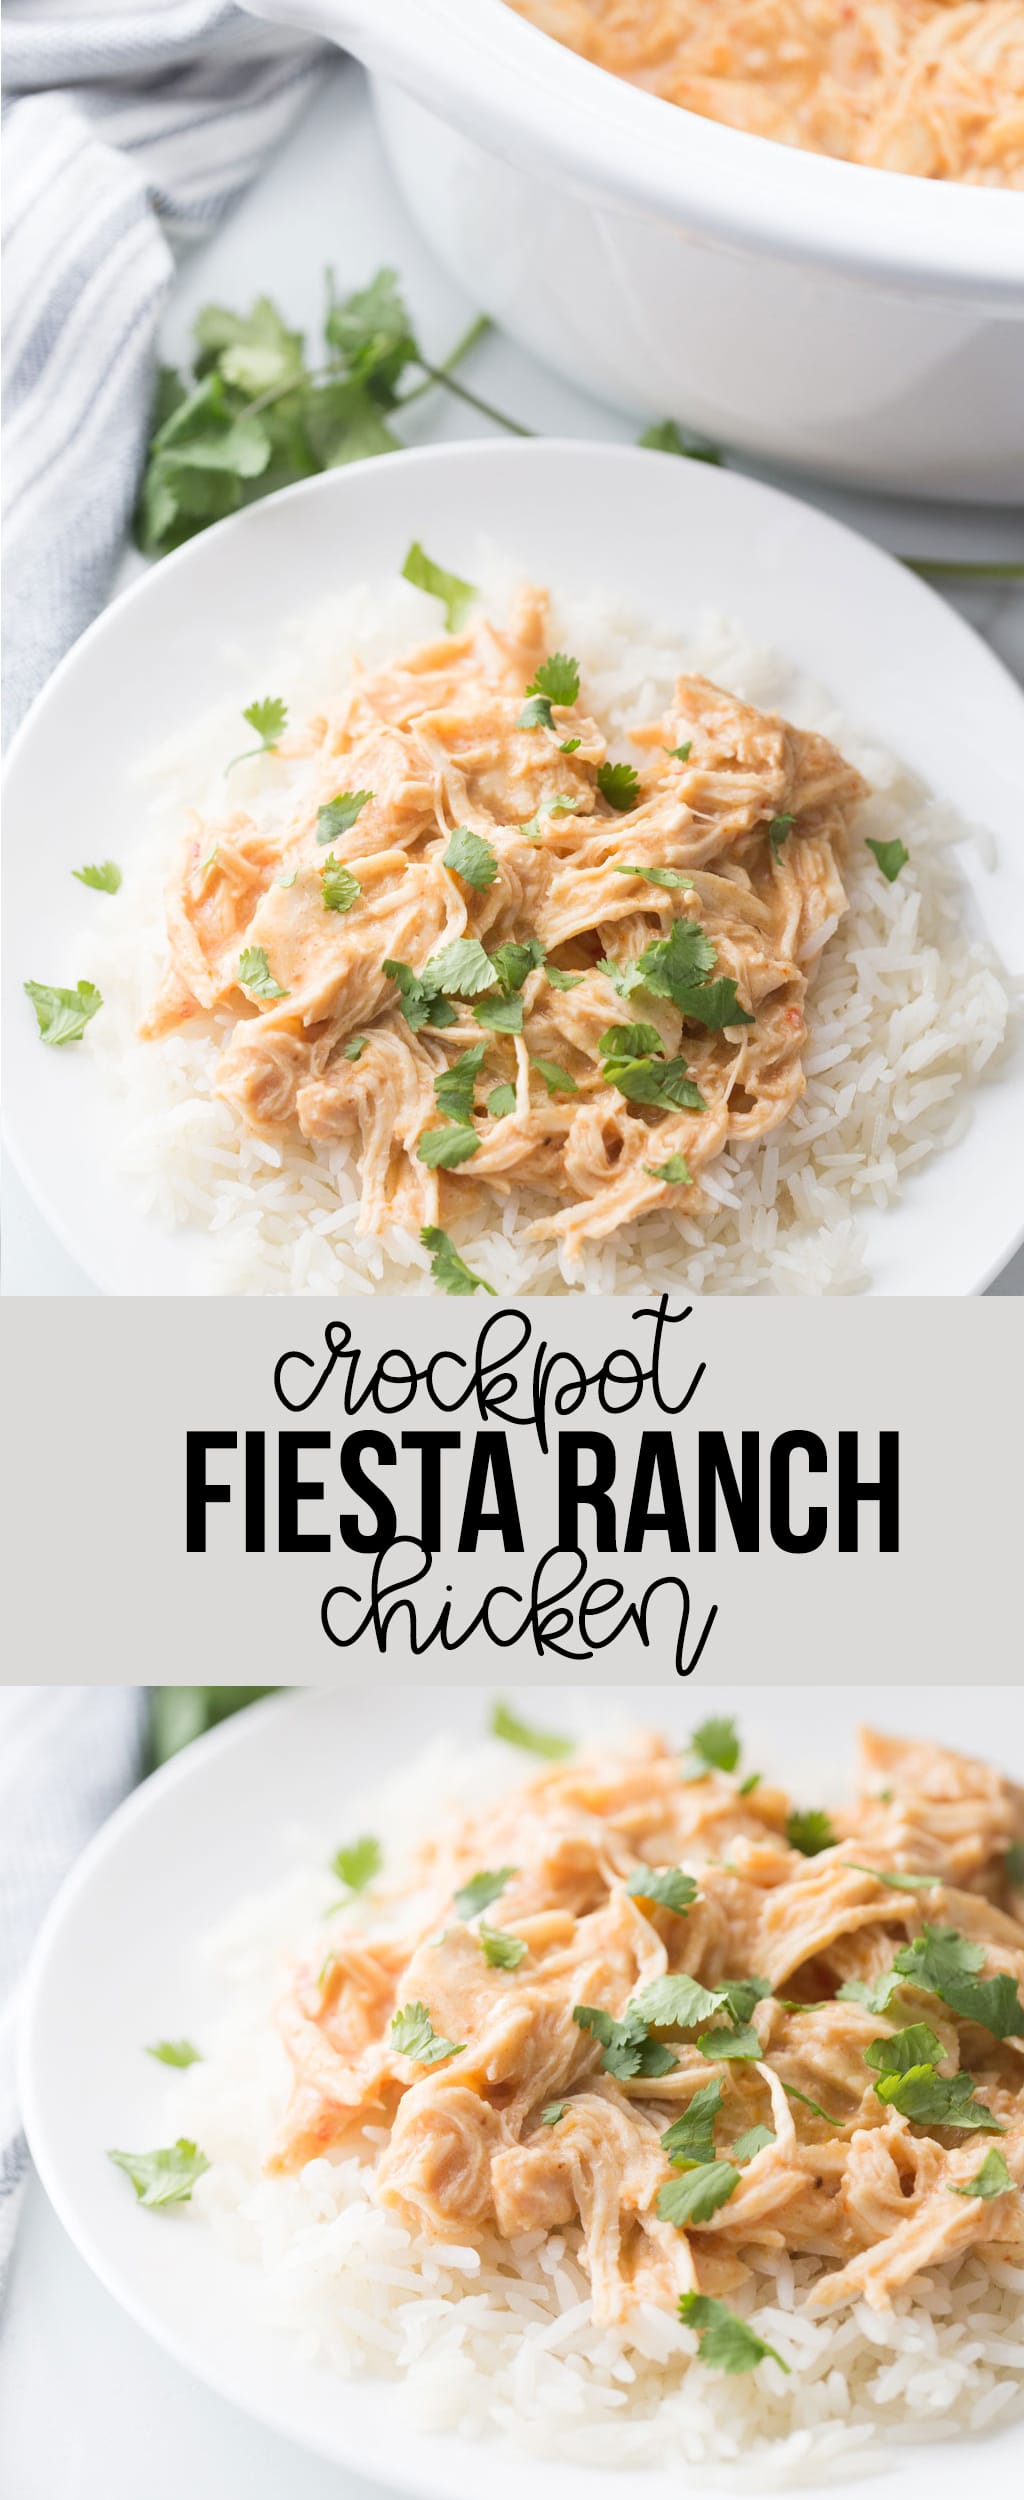 Crockpot Fiesta Ranch chicken served over white rice with cilantro sprinkled over top.